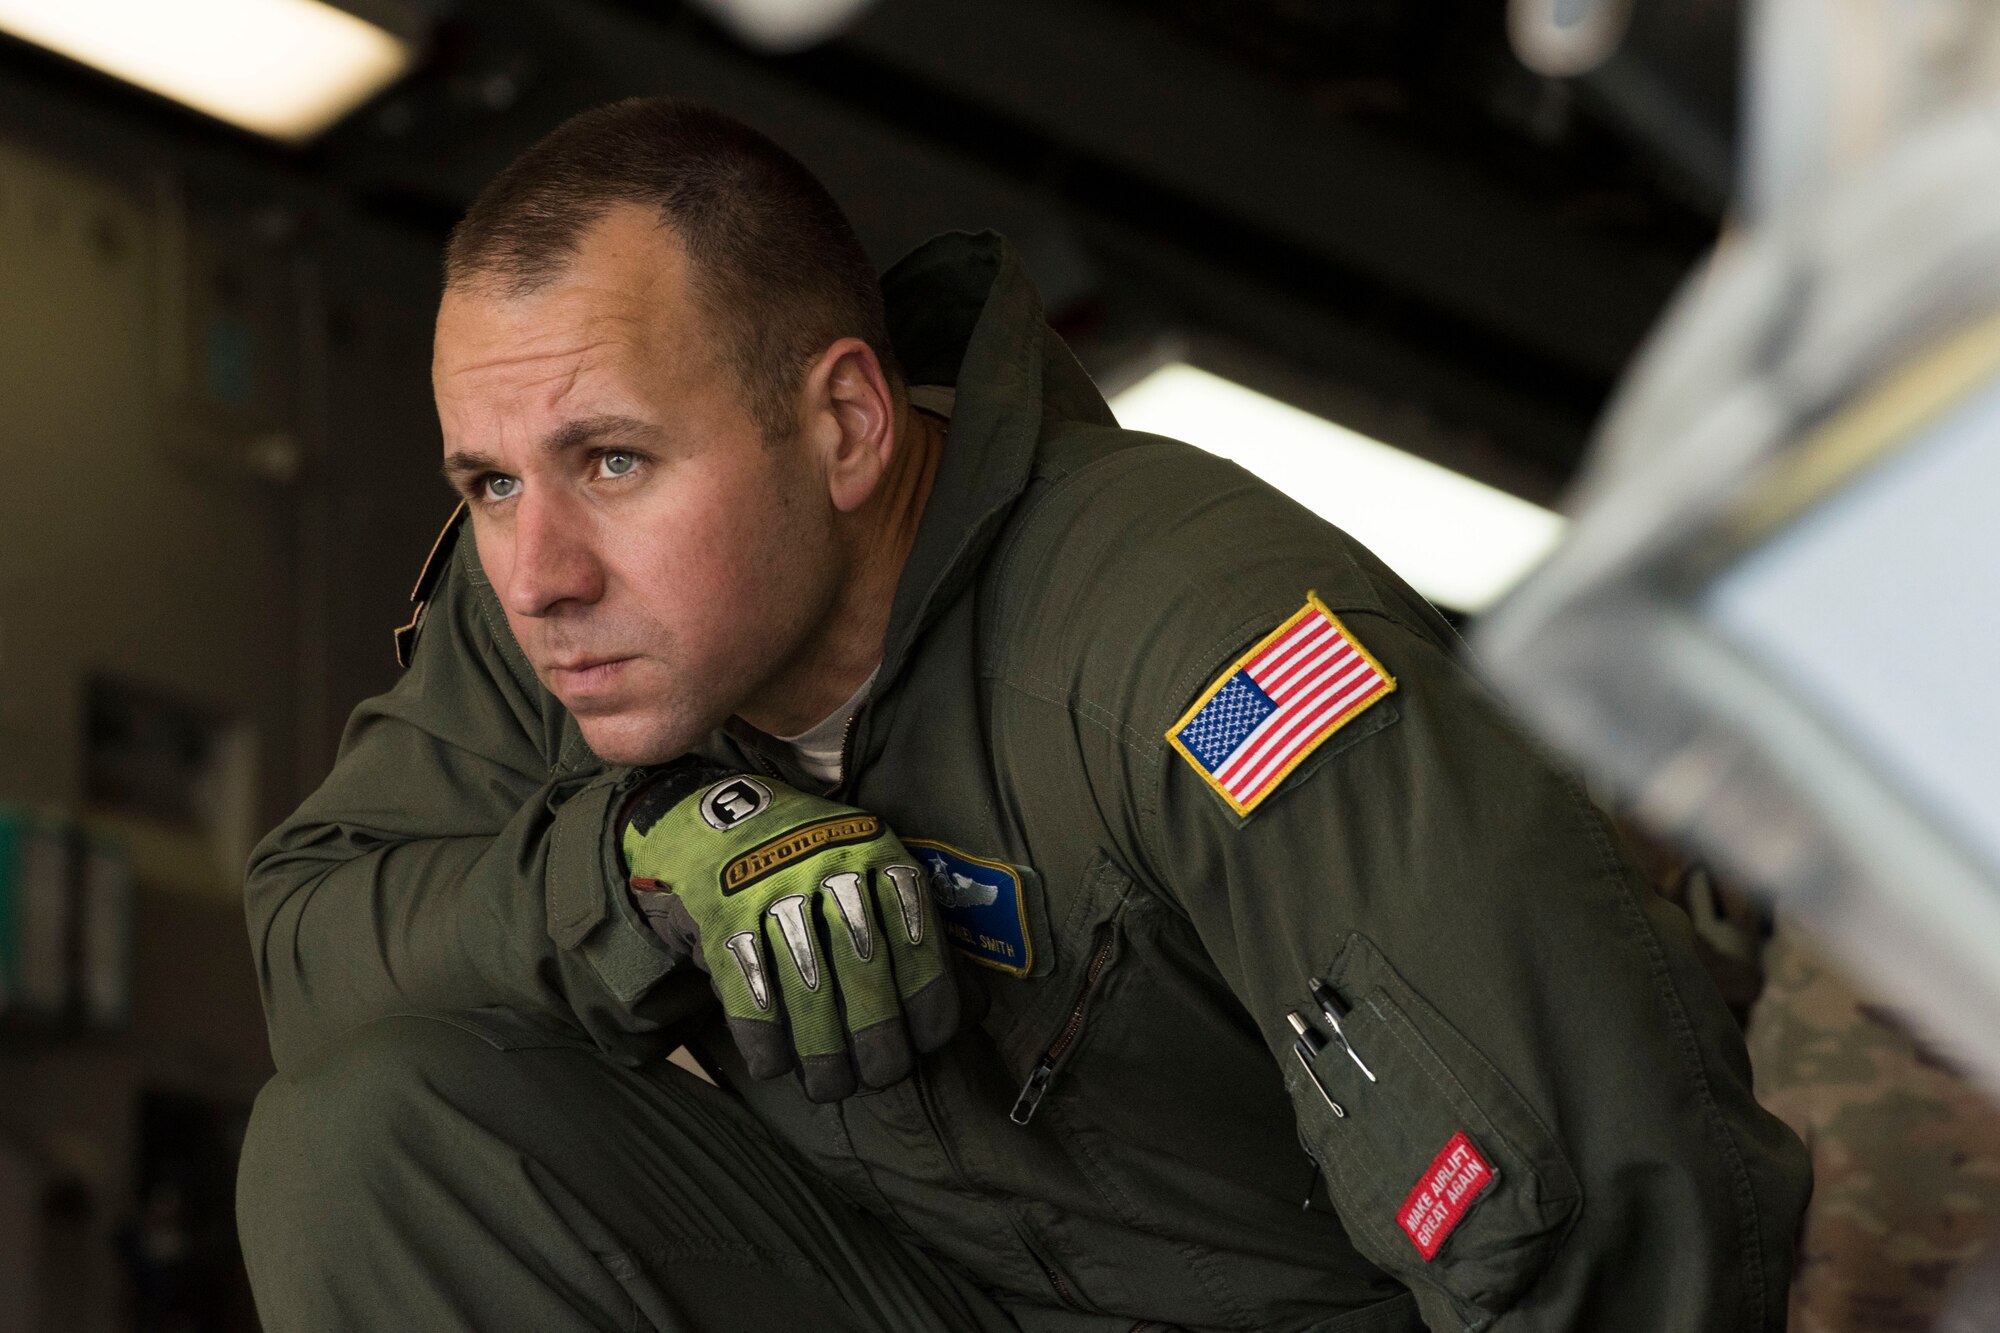 Master Sgt. Nathan Smith, a loadmaster for the 167th Airlift Wing, oversees the loading of a C-17 Globemaster III.  Six generators and a Large Area Maintenance Shelter (LAMS) from the 635th Materiel Maintenance Squadron based at Holloman Air Force Base N.M. were loaded onto the C-17, Oct. 17, 2018. The C-17 deliever the equipment to Tyndall AFB the following day with the assistance of a contingency response team from the 821st Contingency Response Group, Travis AFB, Calif. Tyndall AFB took a direct hit from Hurricane Michael, which made landfall as a category 4 storm on Oct. 10. The 635th Materiel Maintenance Group is the Air Force’s only organic Basic Expeditionary Airfield Resources (BEAR) unit. The Group is responsible for the storage, inspection, repair, deployment, and accountability of BEAR assets belonging to Air Force Materiel Command and Air Combat Command. (U.S. Air National Guard photo by Senior Master Sgt. Emily Beightol-Deyerle)